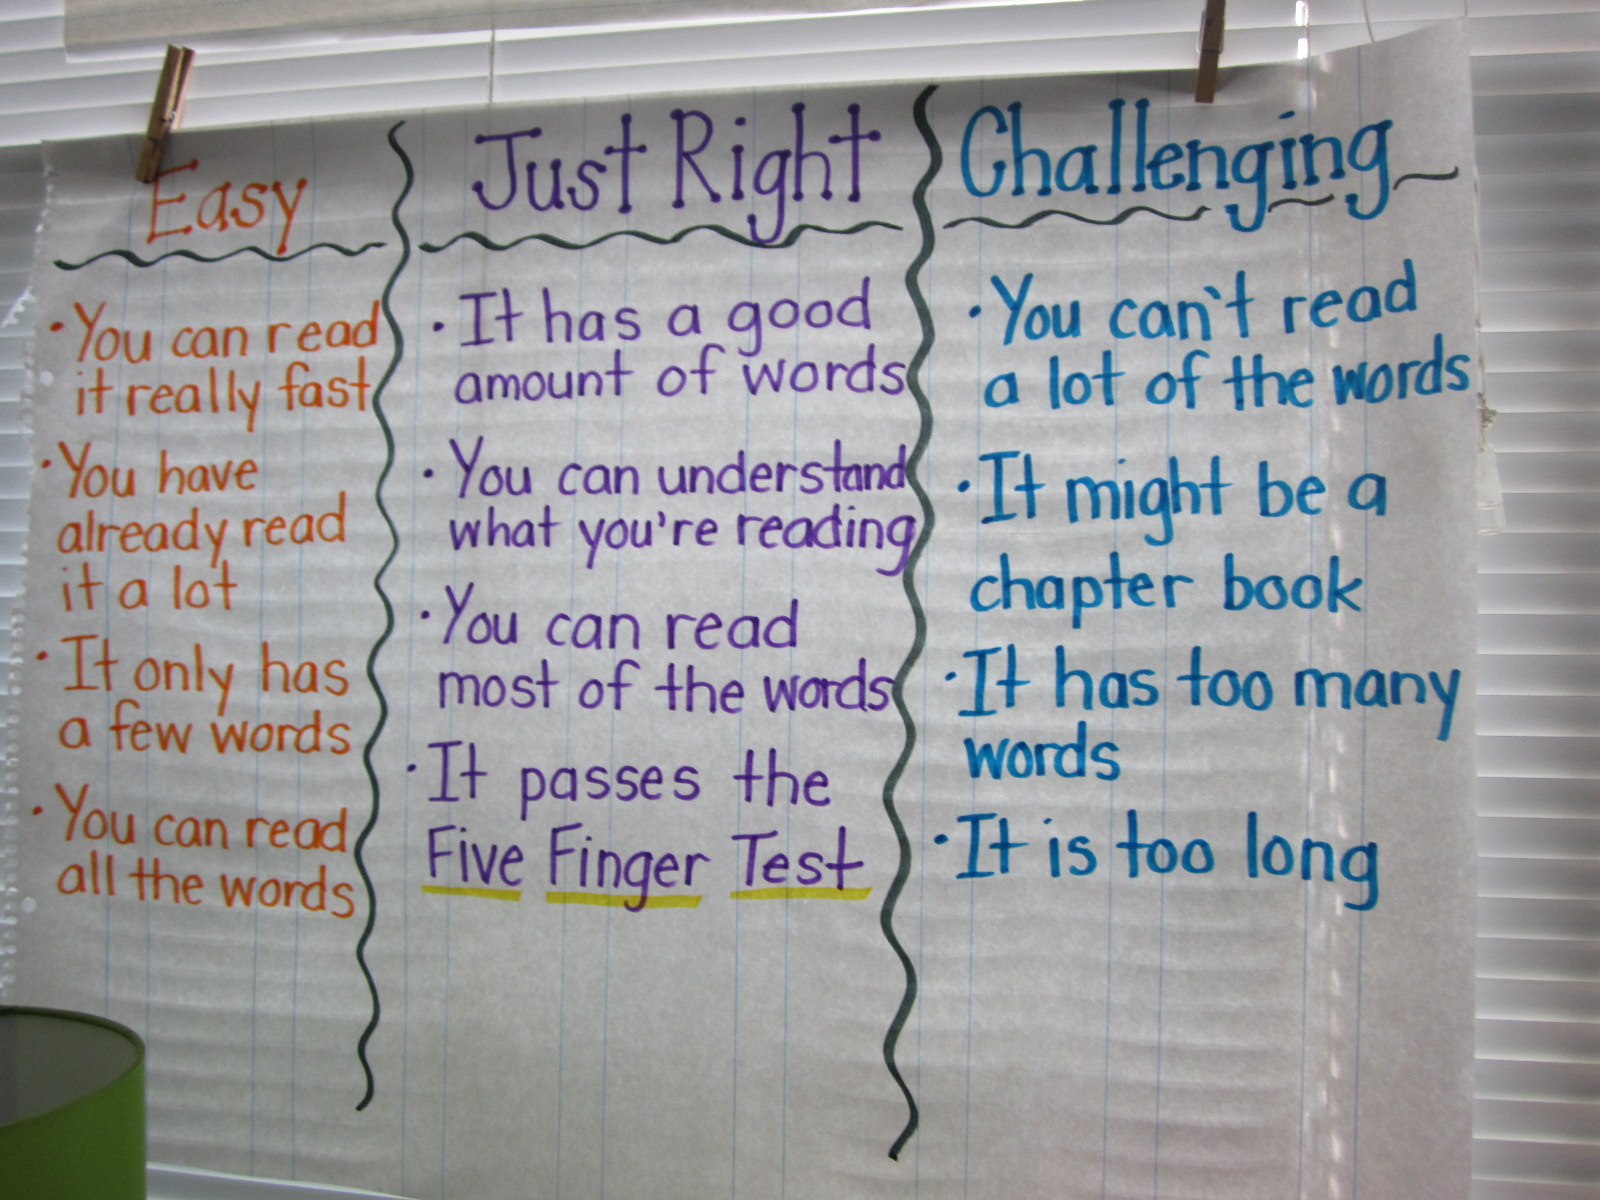 Just Right Books Anchor Chart